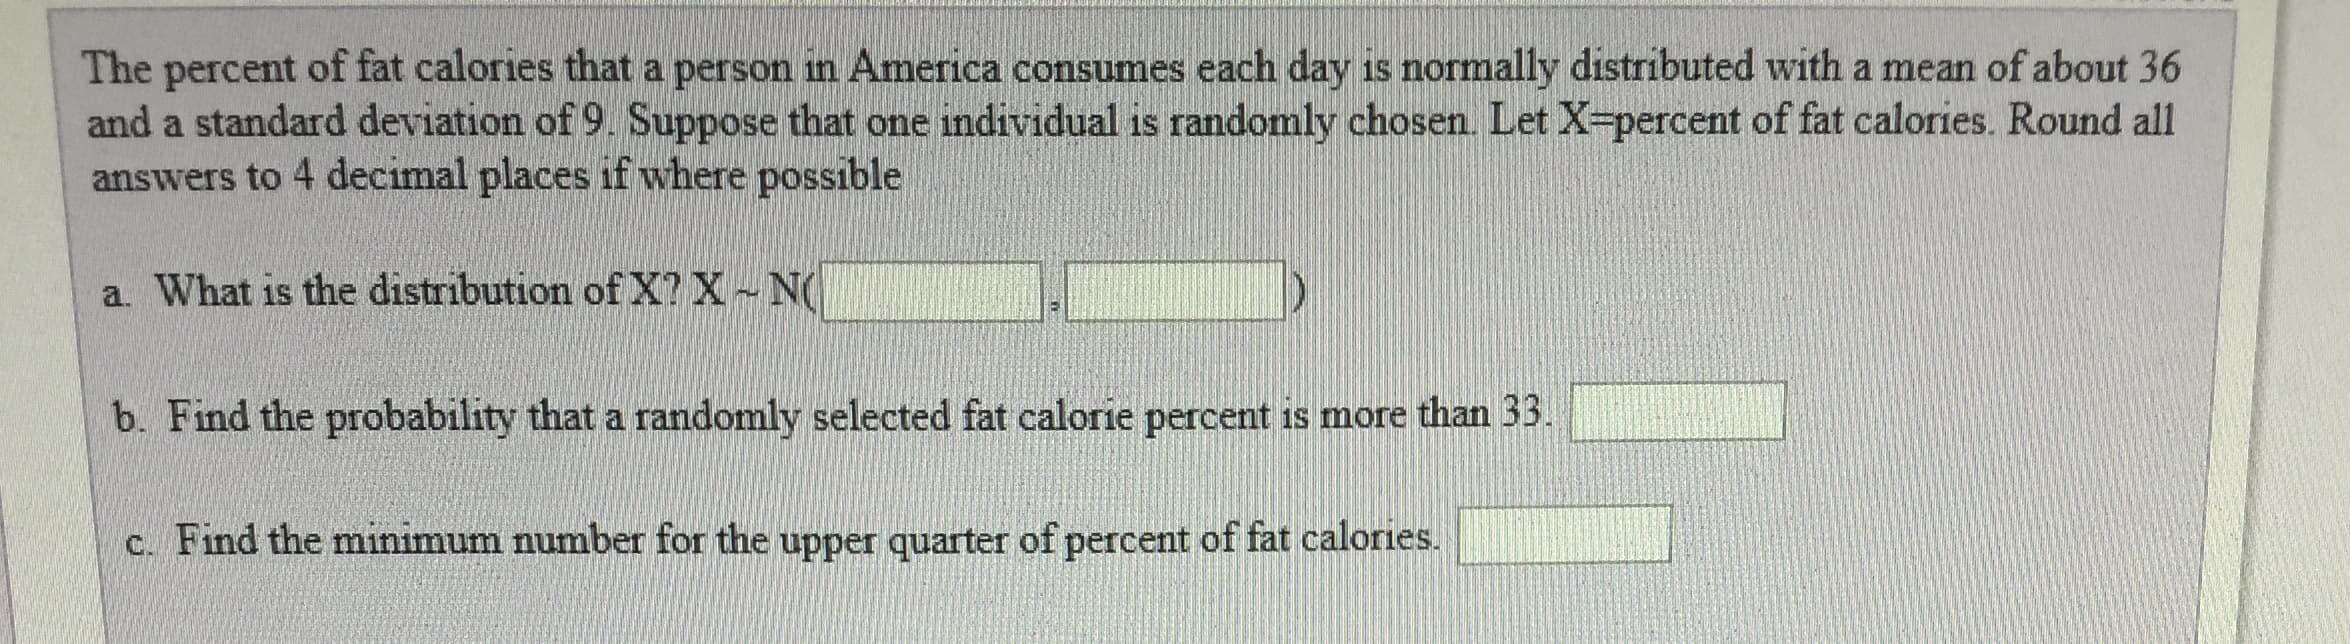 The percent of fat calories that a person in America consumes each day is normally distributed with a mean of about 36
and a standard deviation of 9 Suppose that one individual is randomly chosen Let X percent of fat calories. Round all
answers to 4 decimal places if where possible
a. What is the distribution of X?X ~ N(
b. Find the probability that a randomly selected fat calorie percent is more than 33.
c. Find the minimum number for the upper quarter of percent of fat calories.
